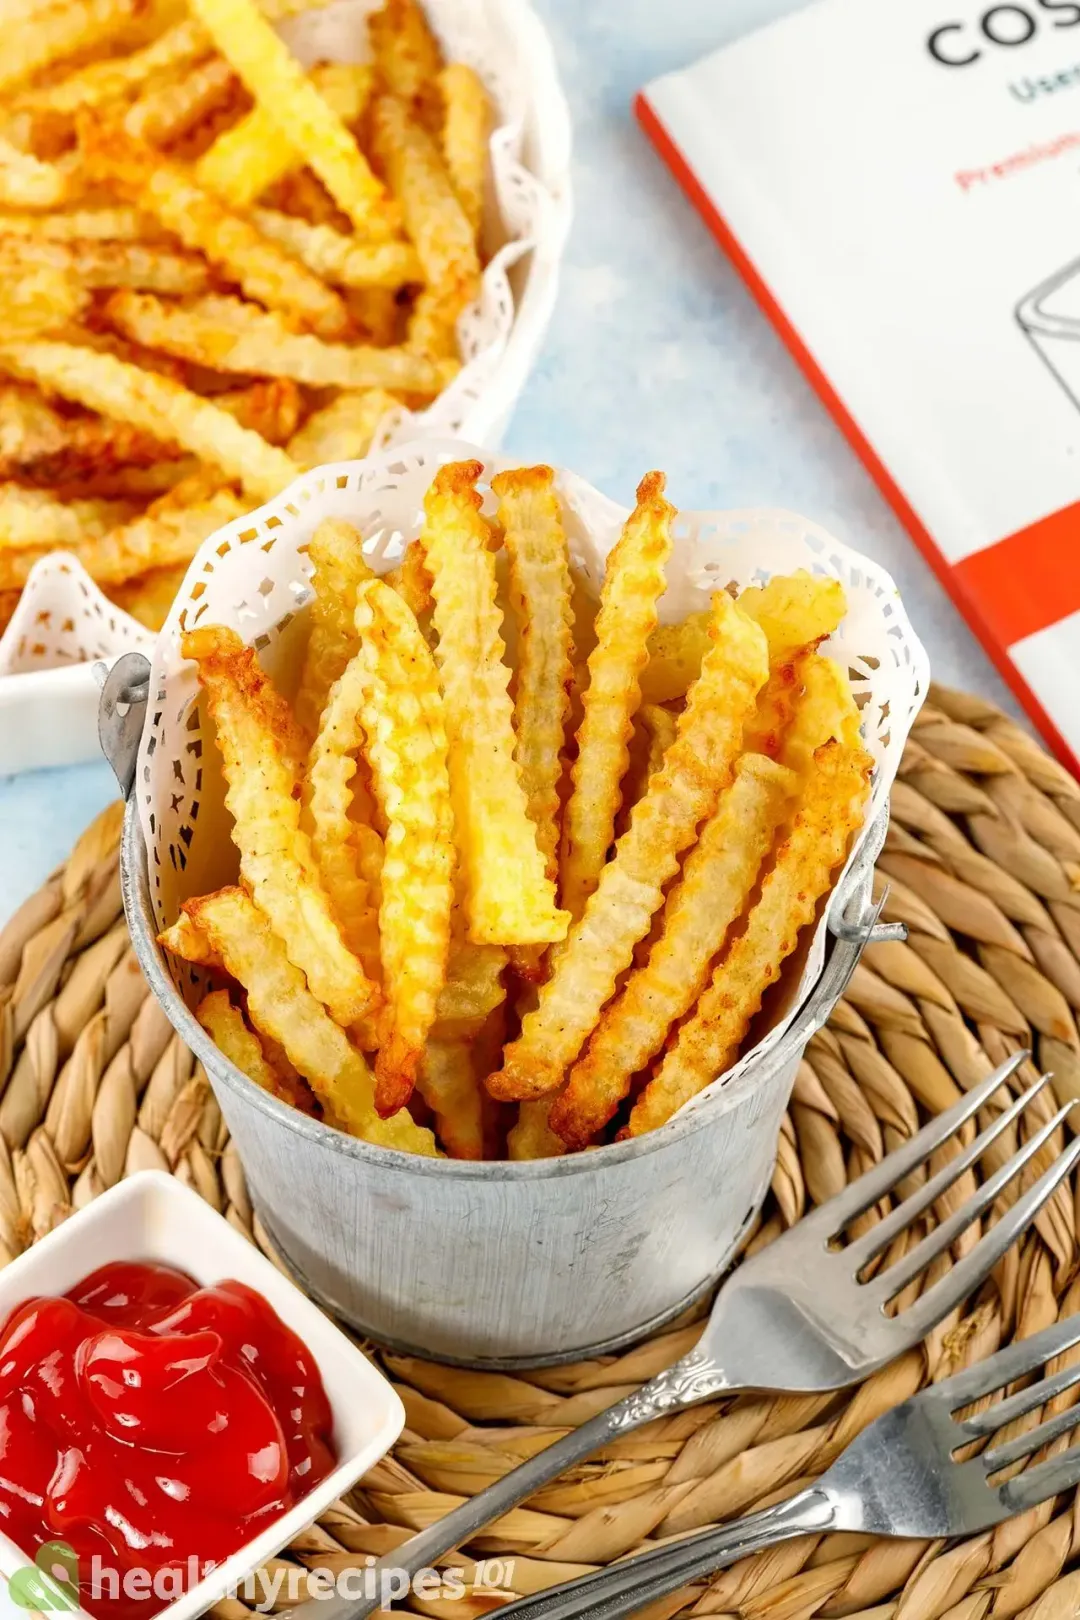 how to make frozen french fries in an air fryer